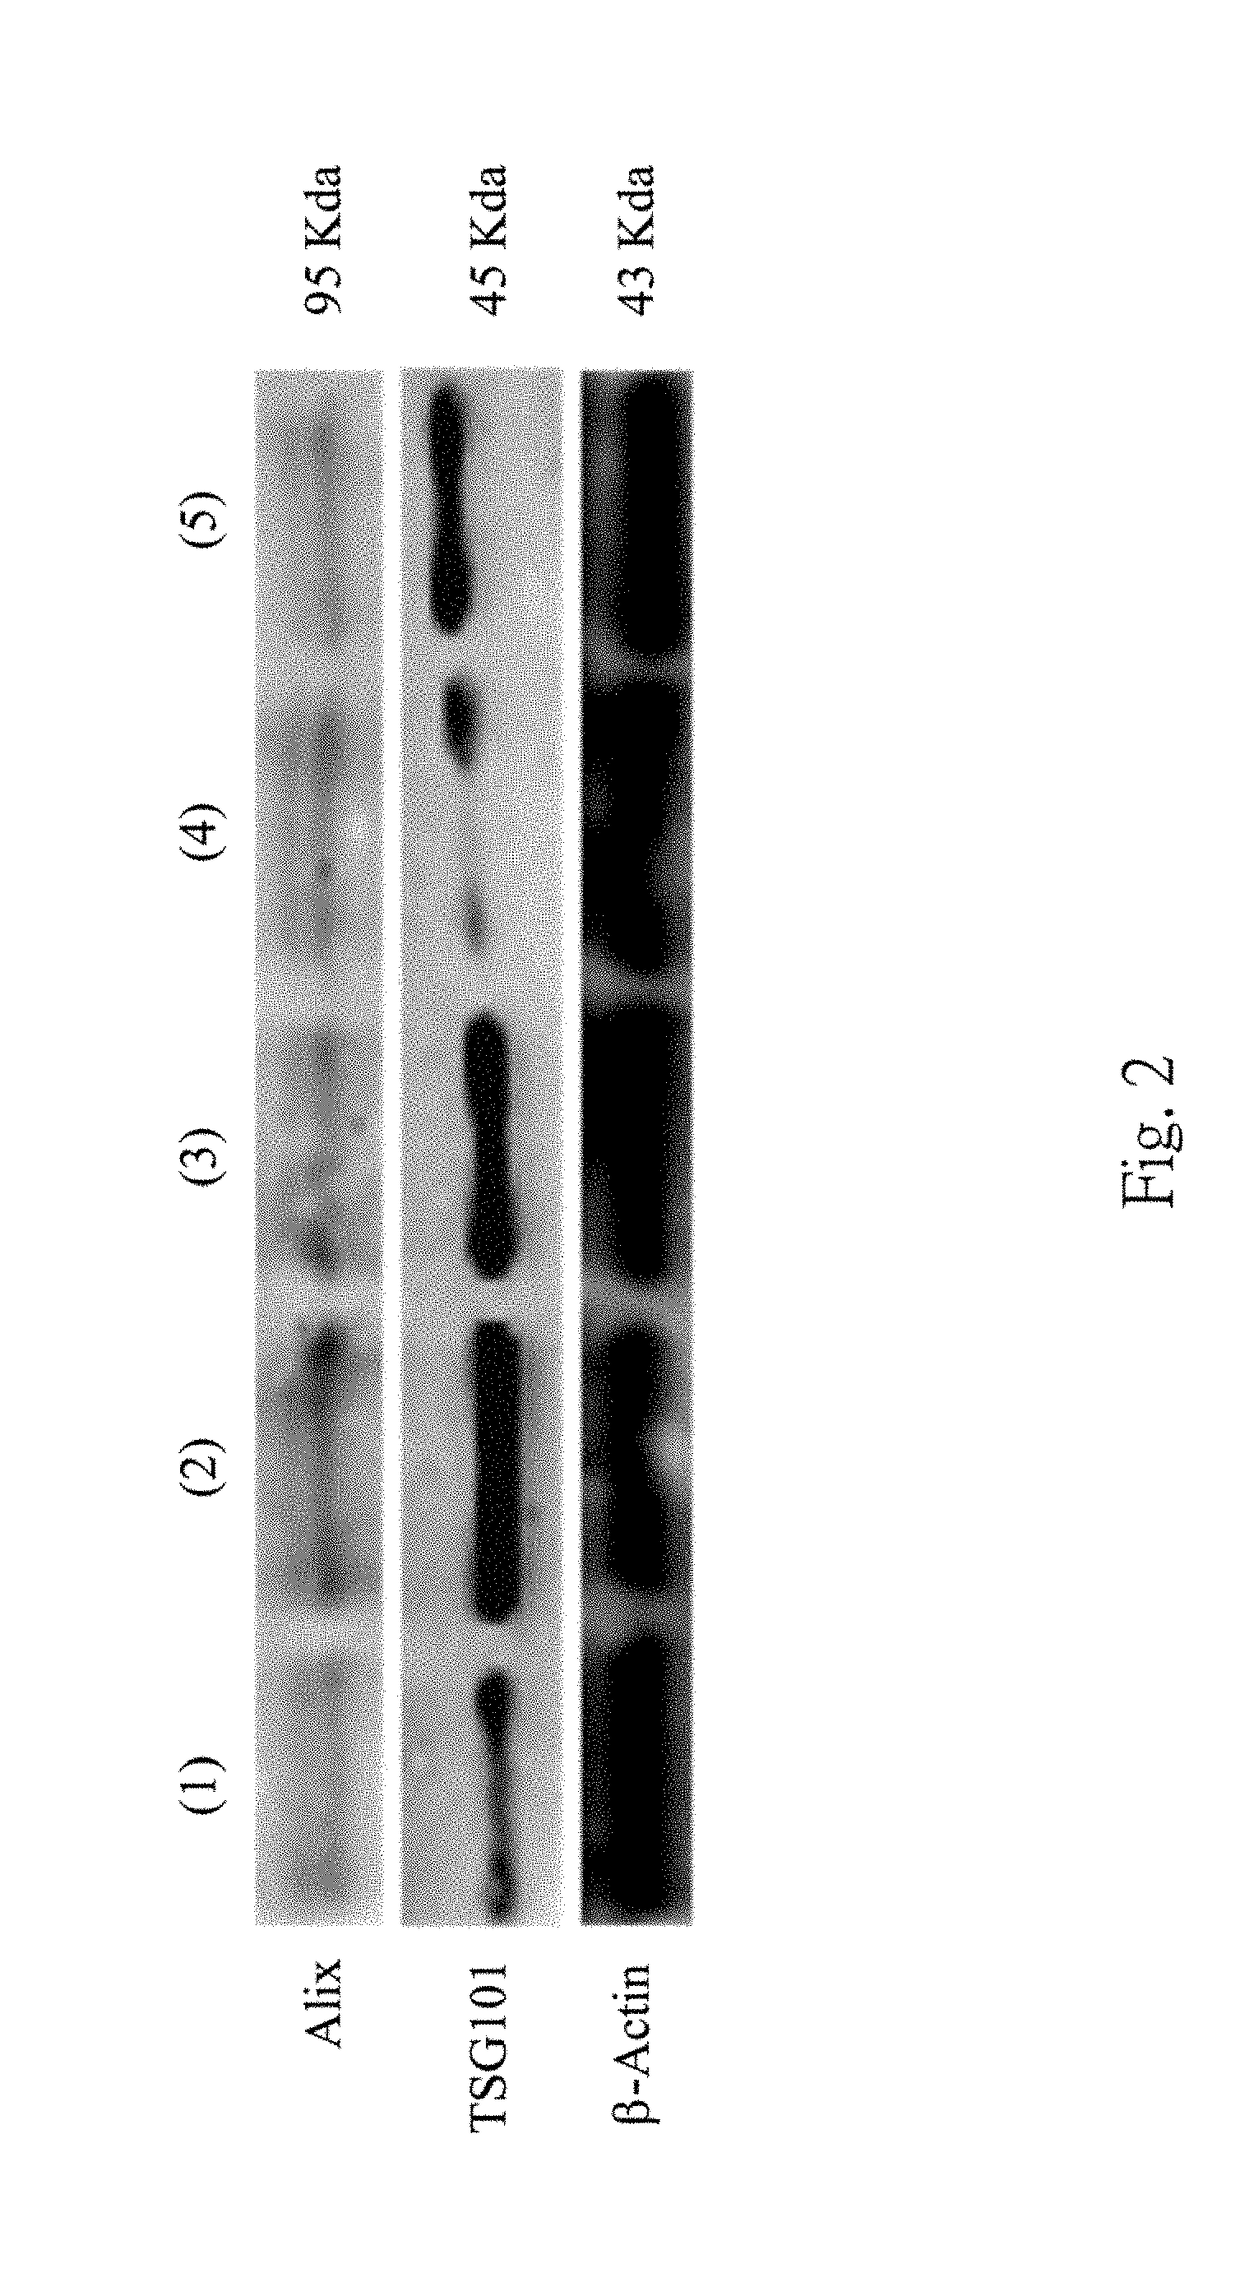 Method for validating existence of urinary exosome, non-invasive method for identifying urothelial cancer, and method for predicting recurrence and progression of urothelial cancer patient after treatment